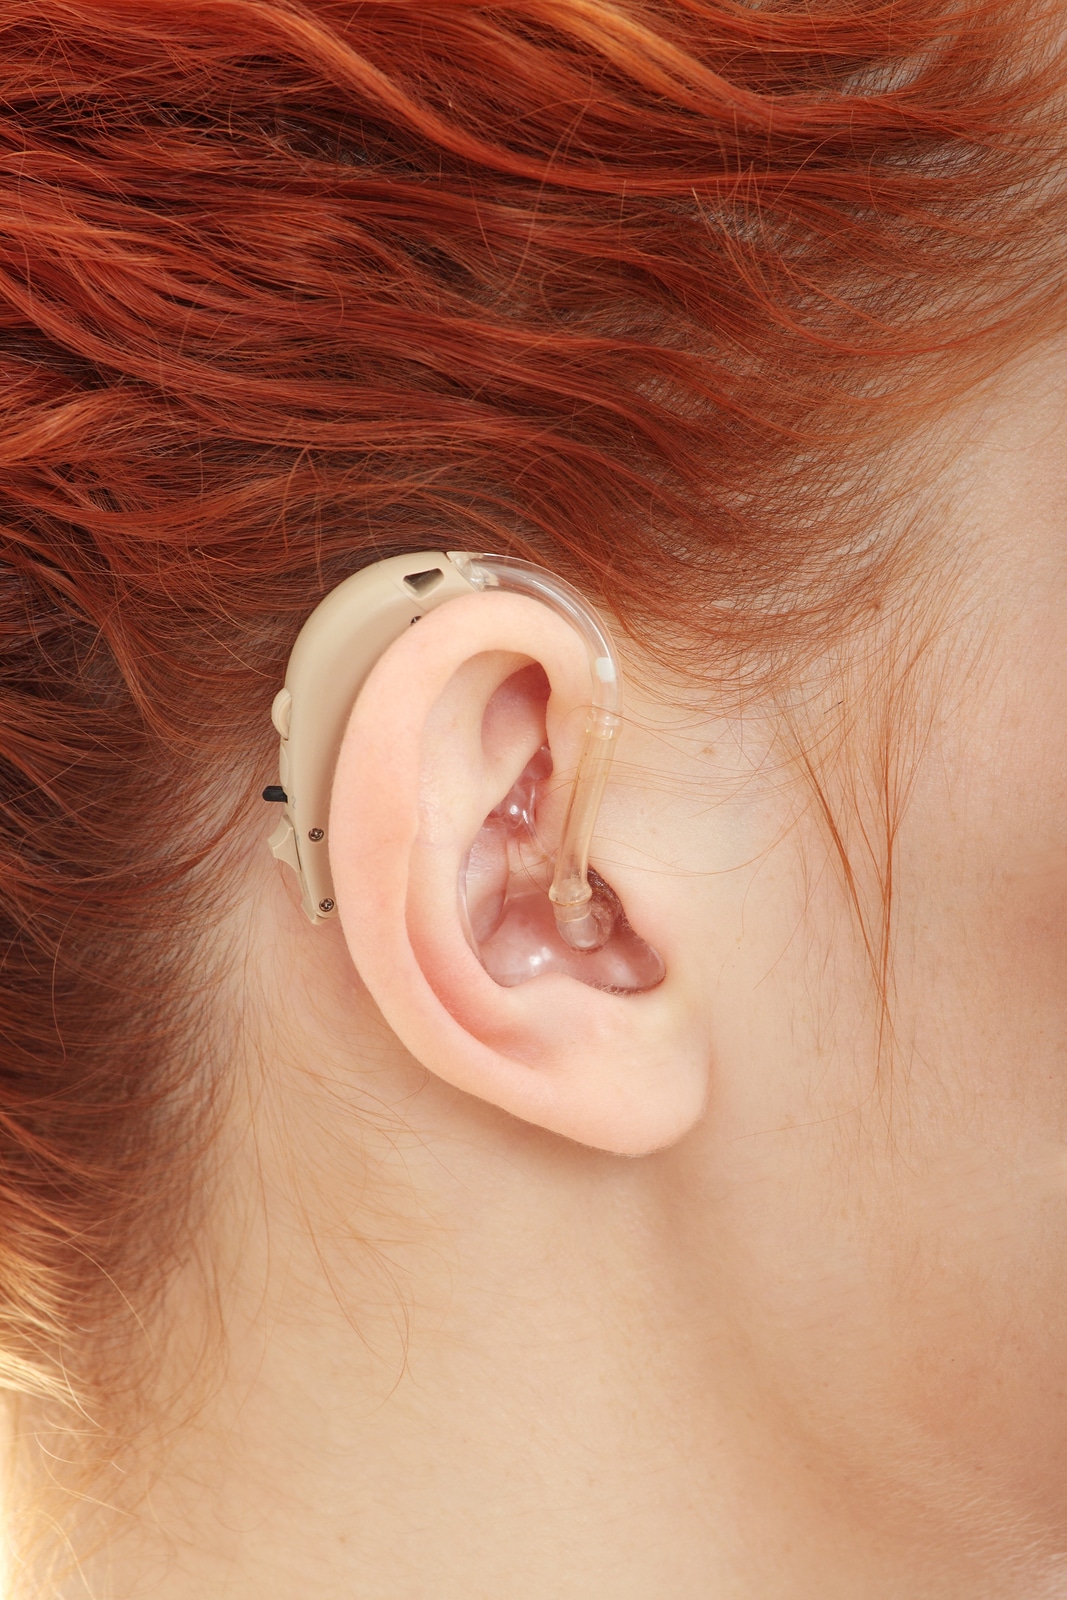 Hearing Aid Buyers Guide: Essential Tips for Making the Right Choice